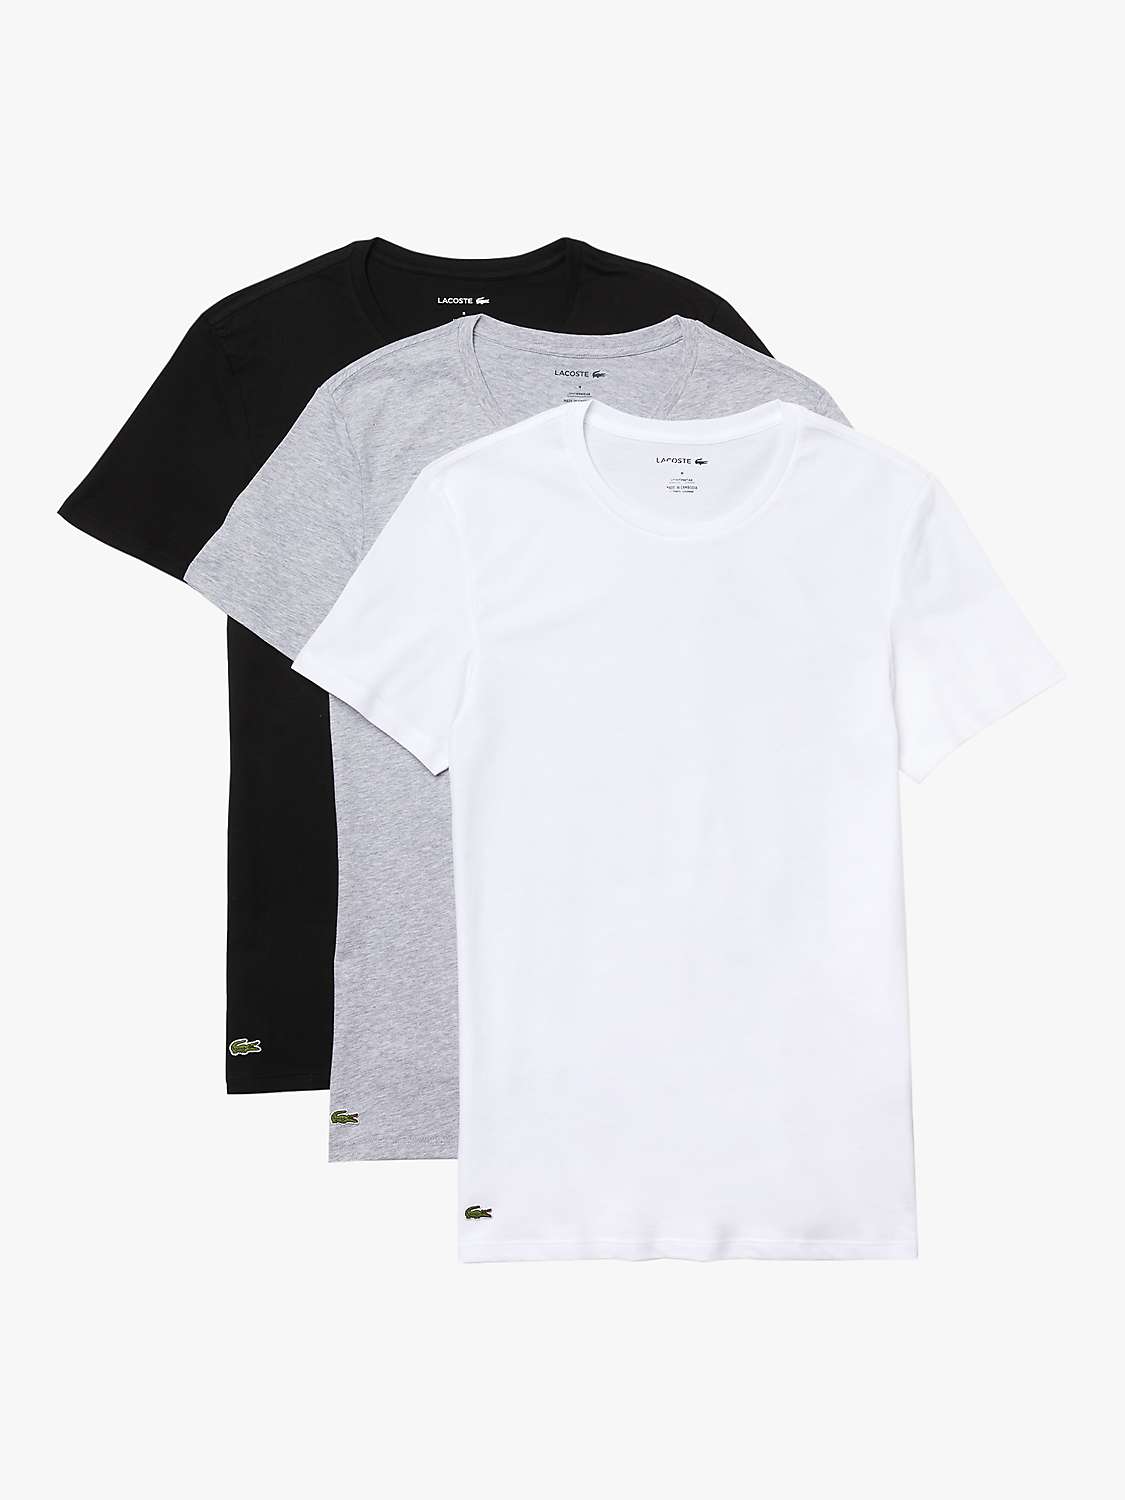 Buy Lacoste Cotton Lounge T-Shirt, Pack of 3, Black/White/Grey Online at johnlewis.com